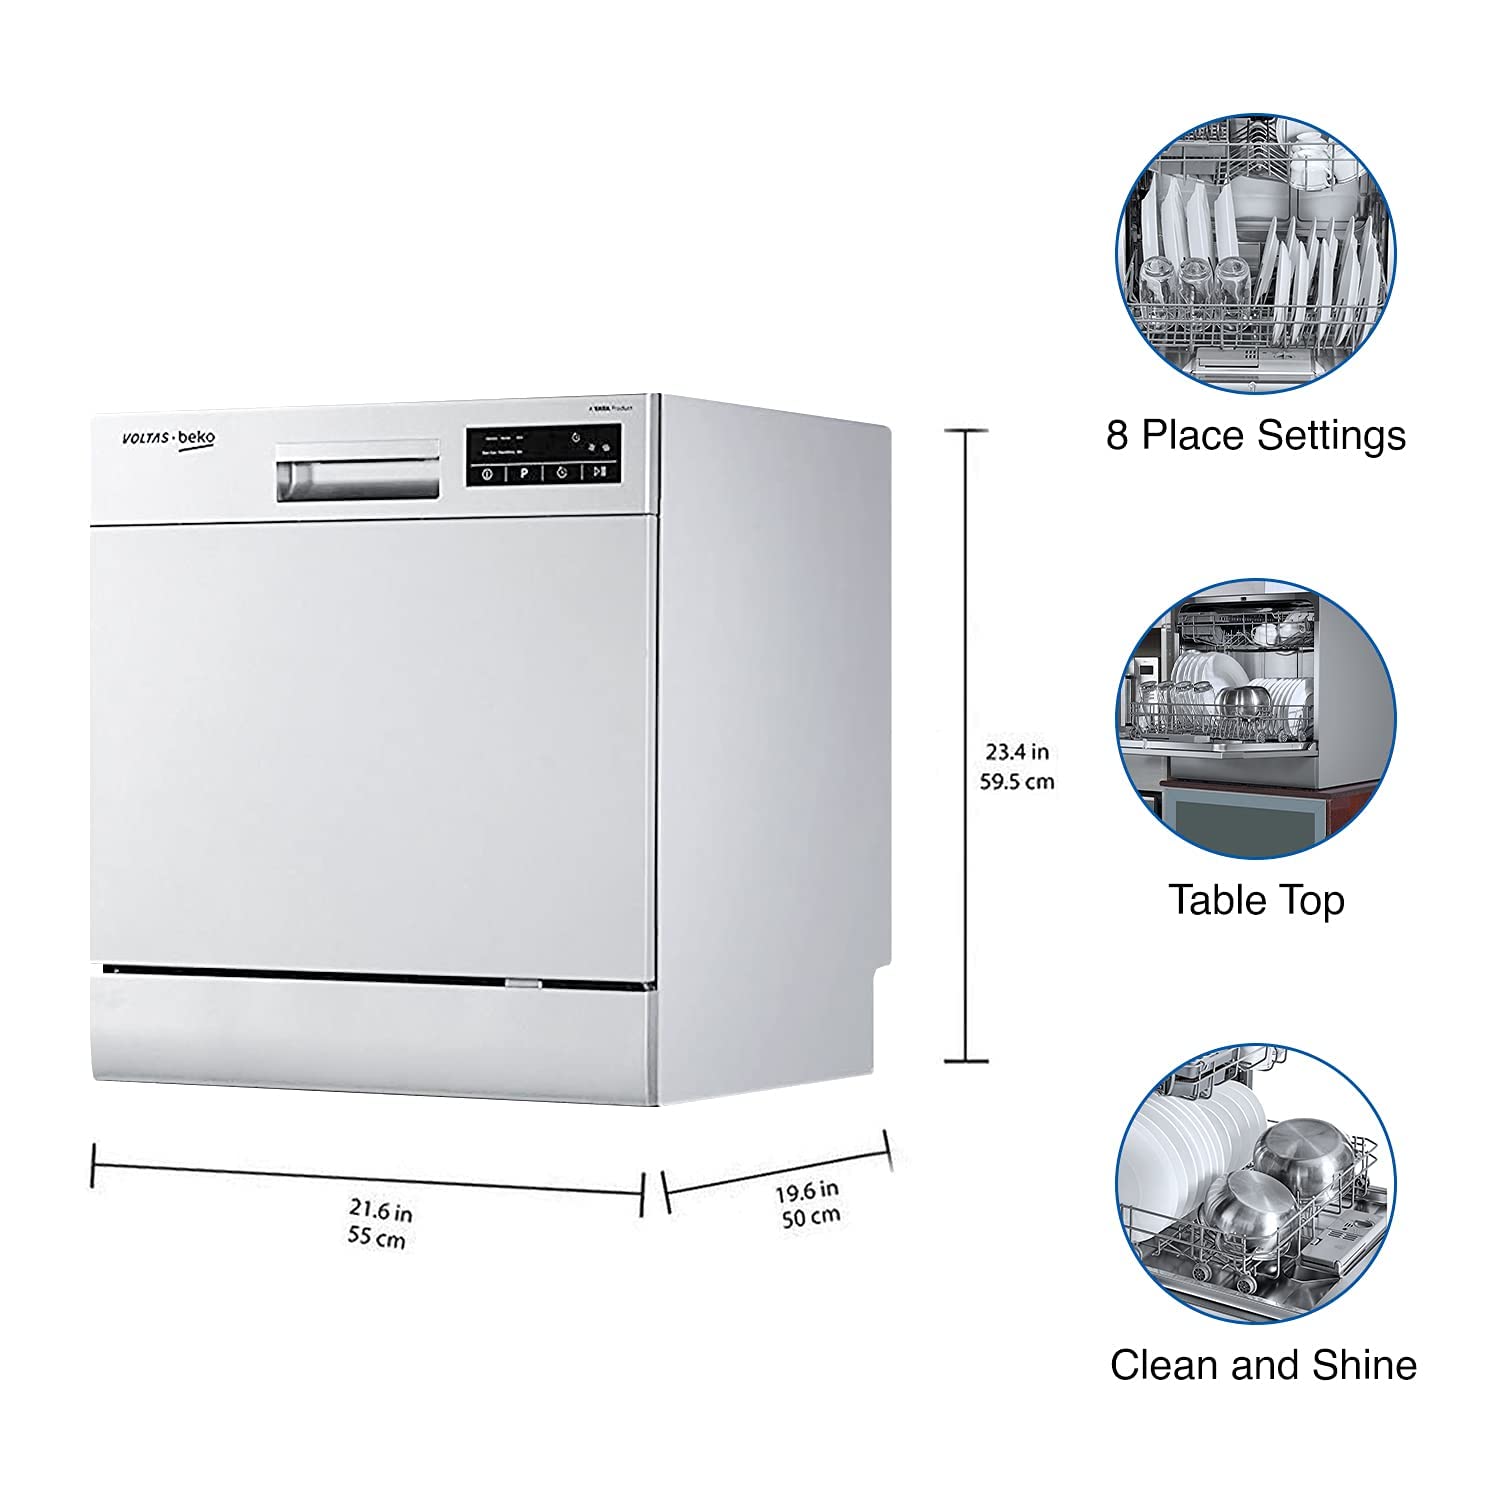 Voltas Beko 8 Place Settings Table Top Dishwasher (DT8S, Silver)